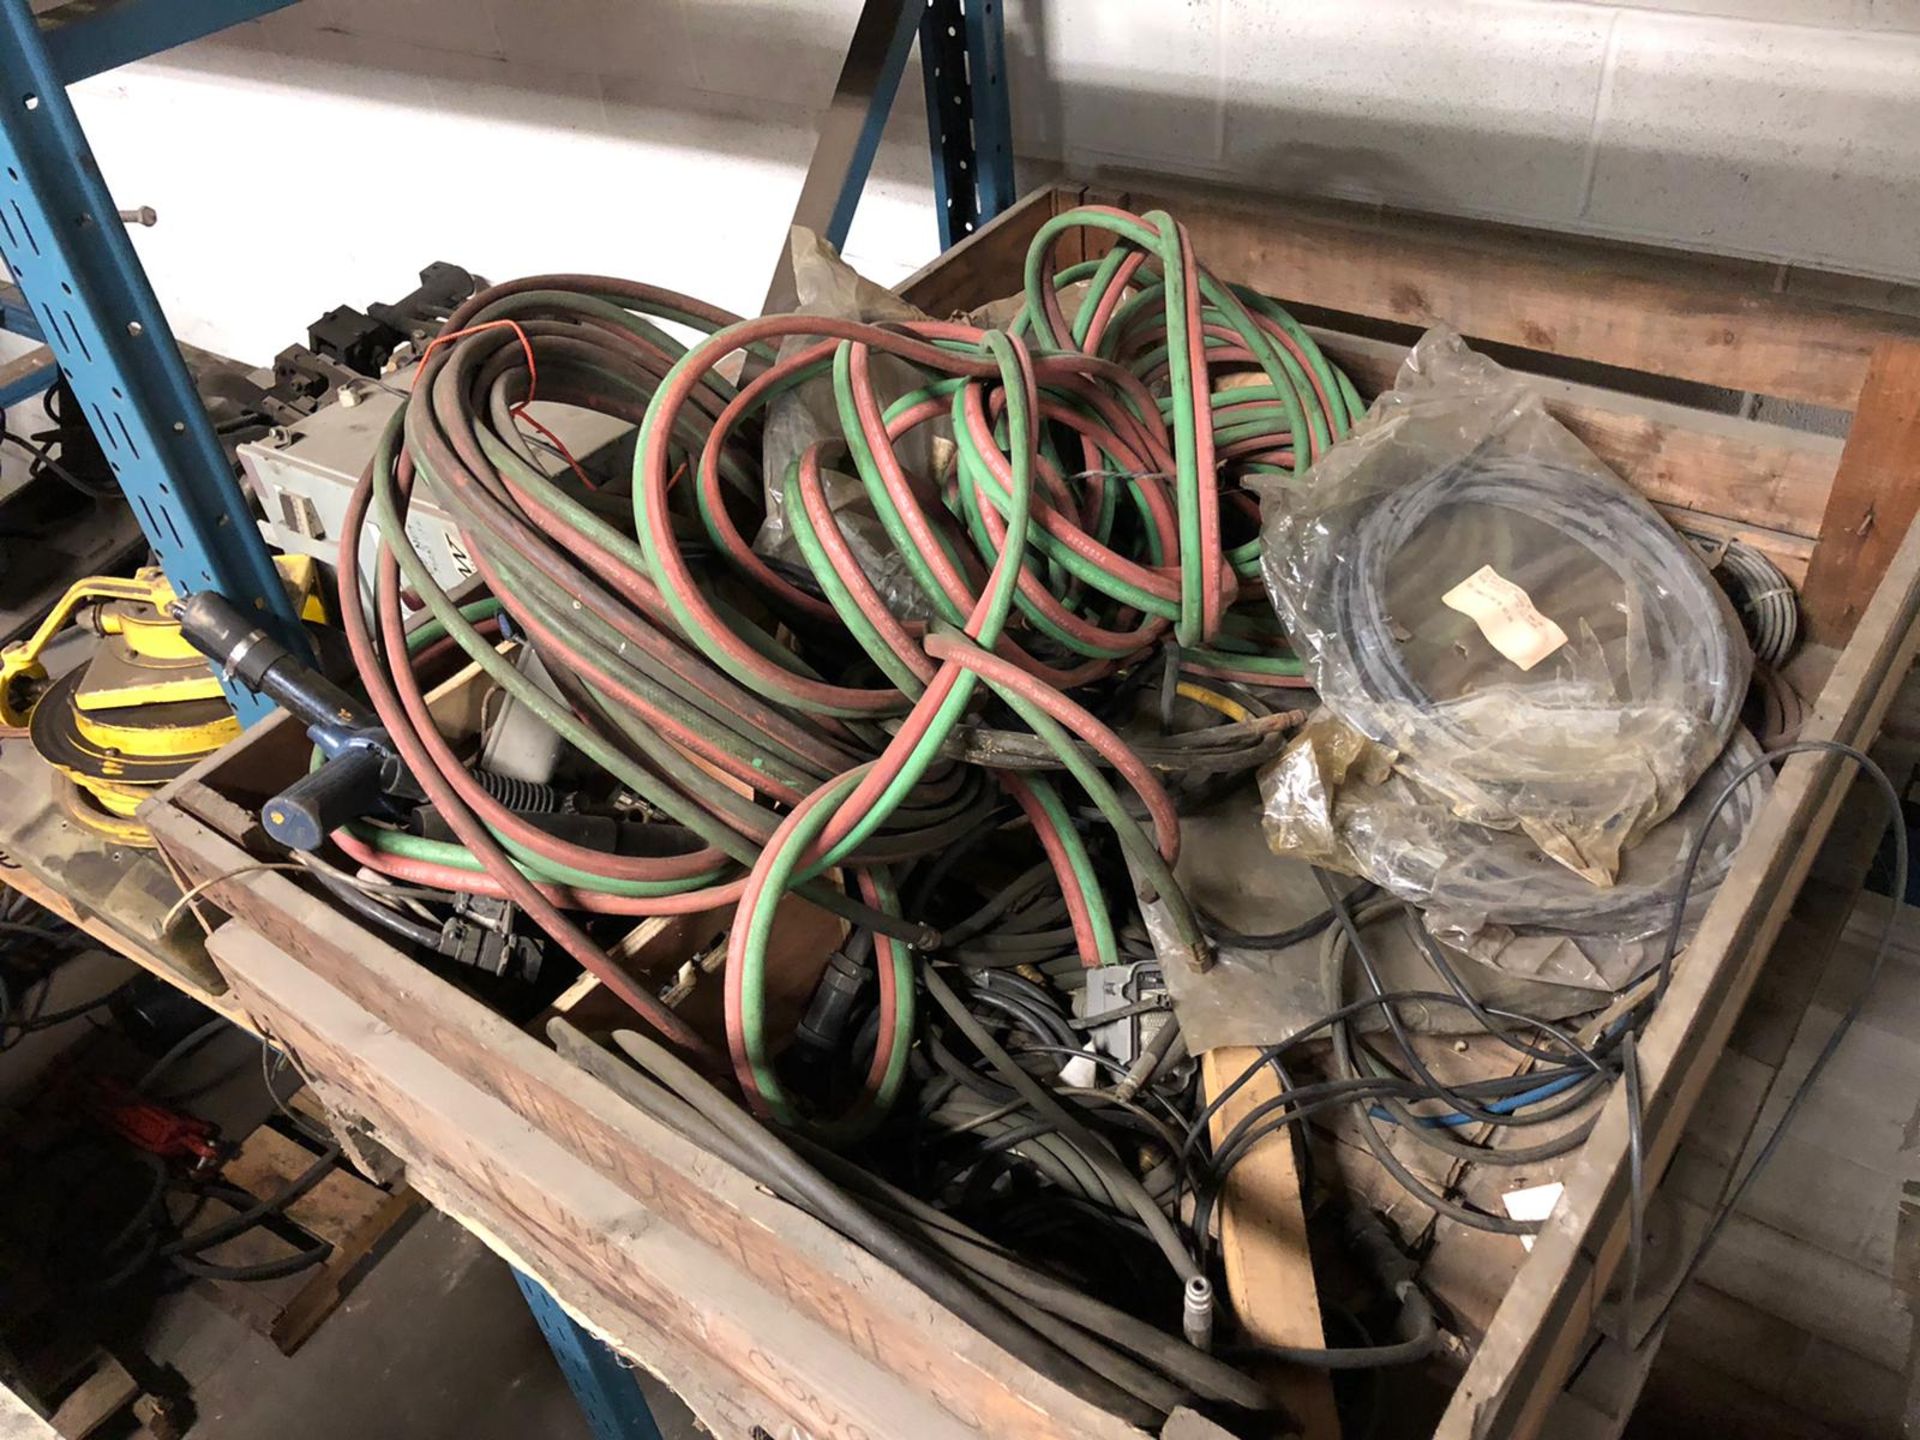 Lot of welding cables and hoses with electrical wire